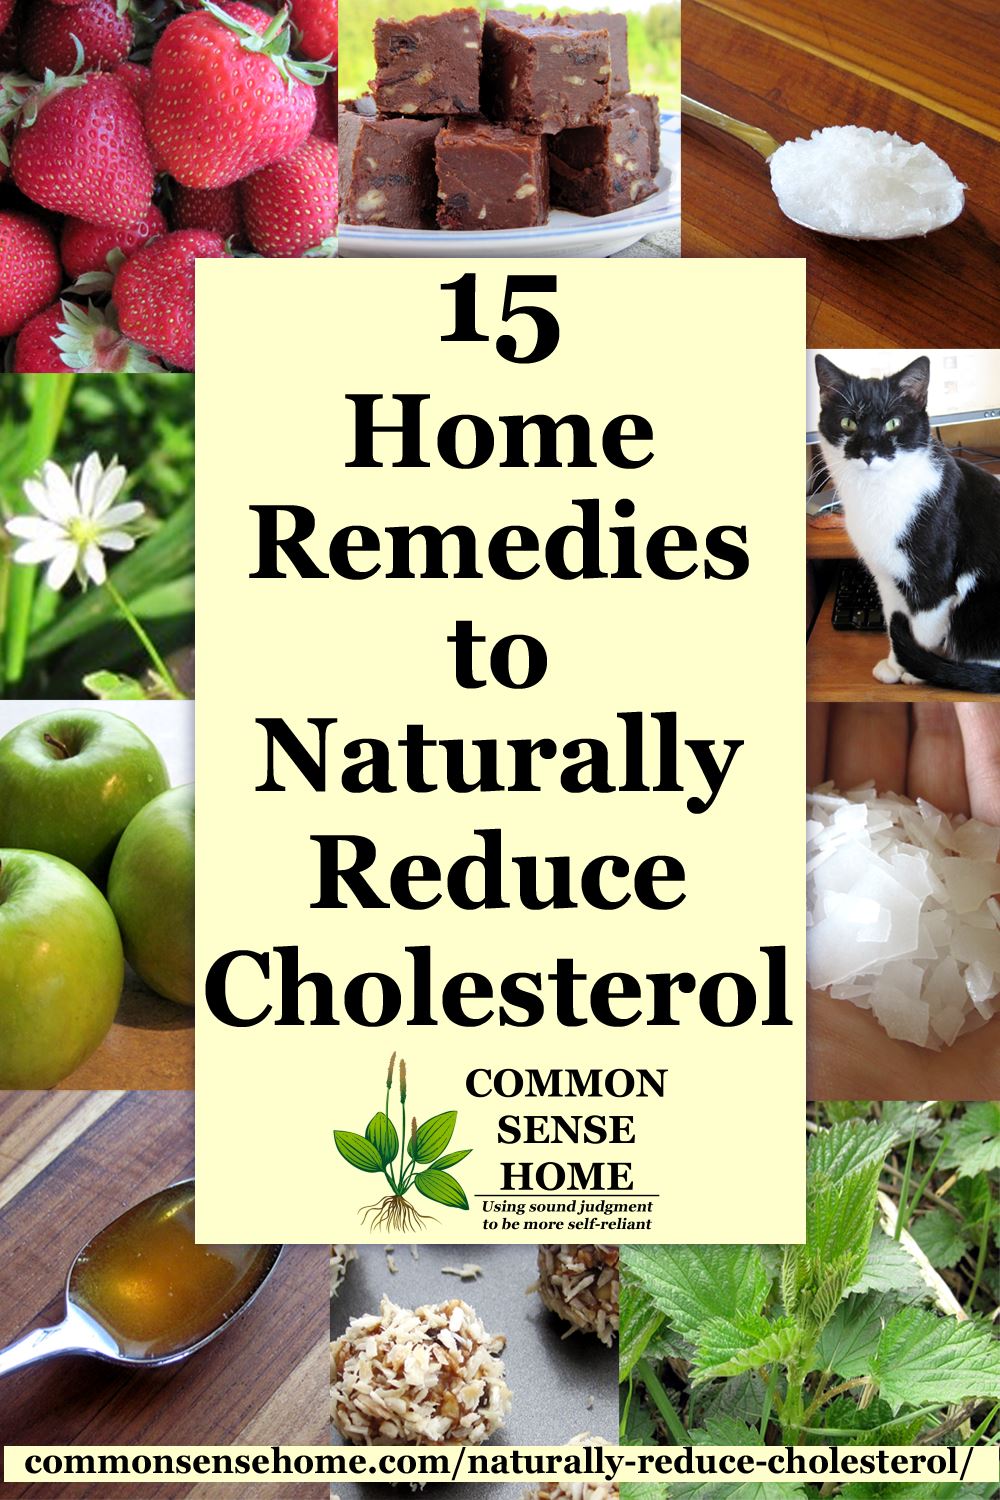 Collage of home remedies to reduce cholesterol